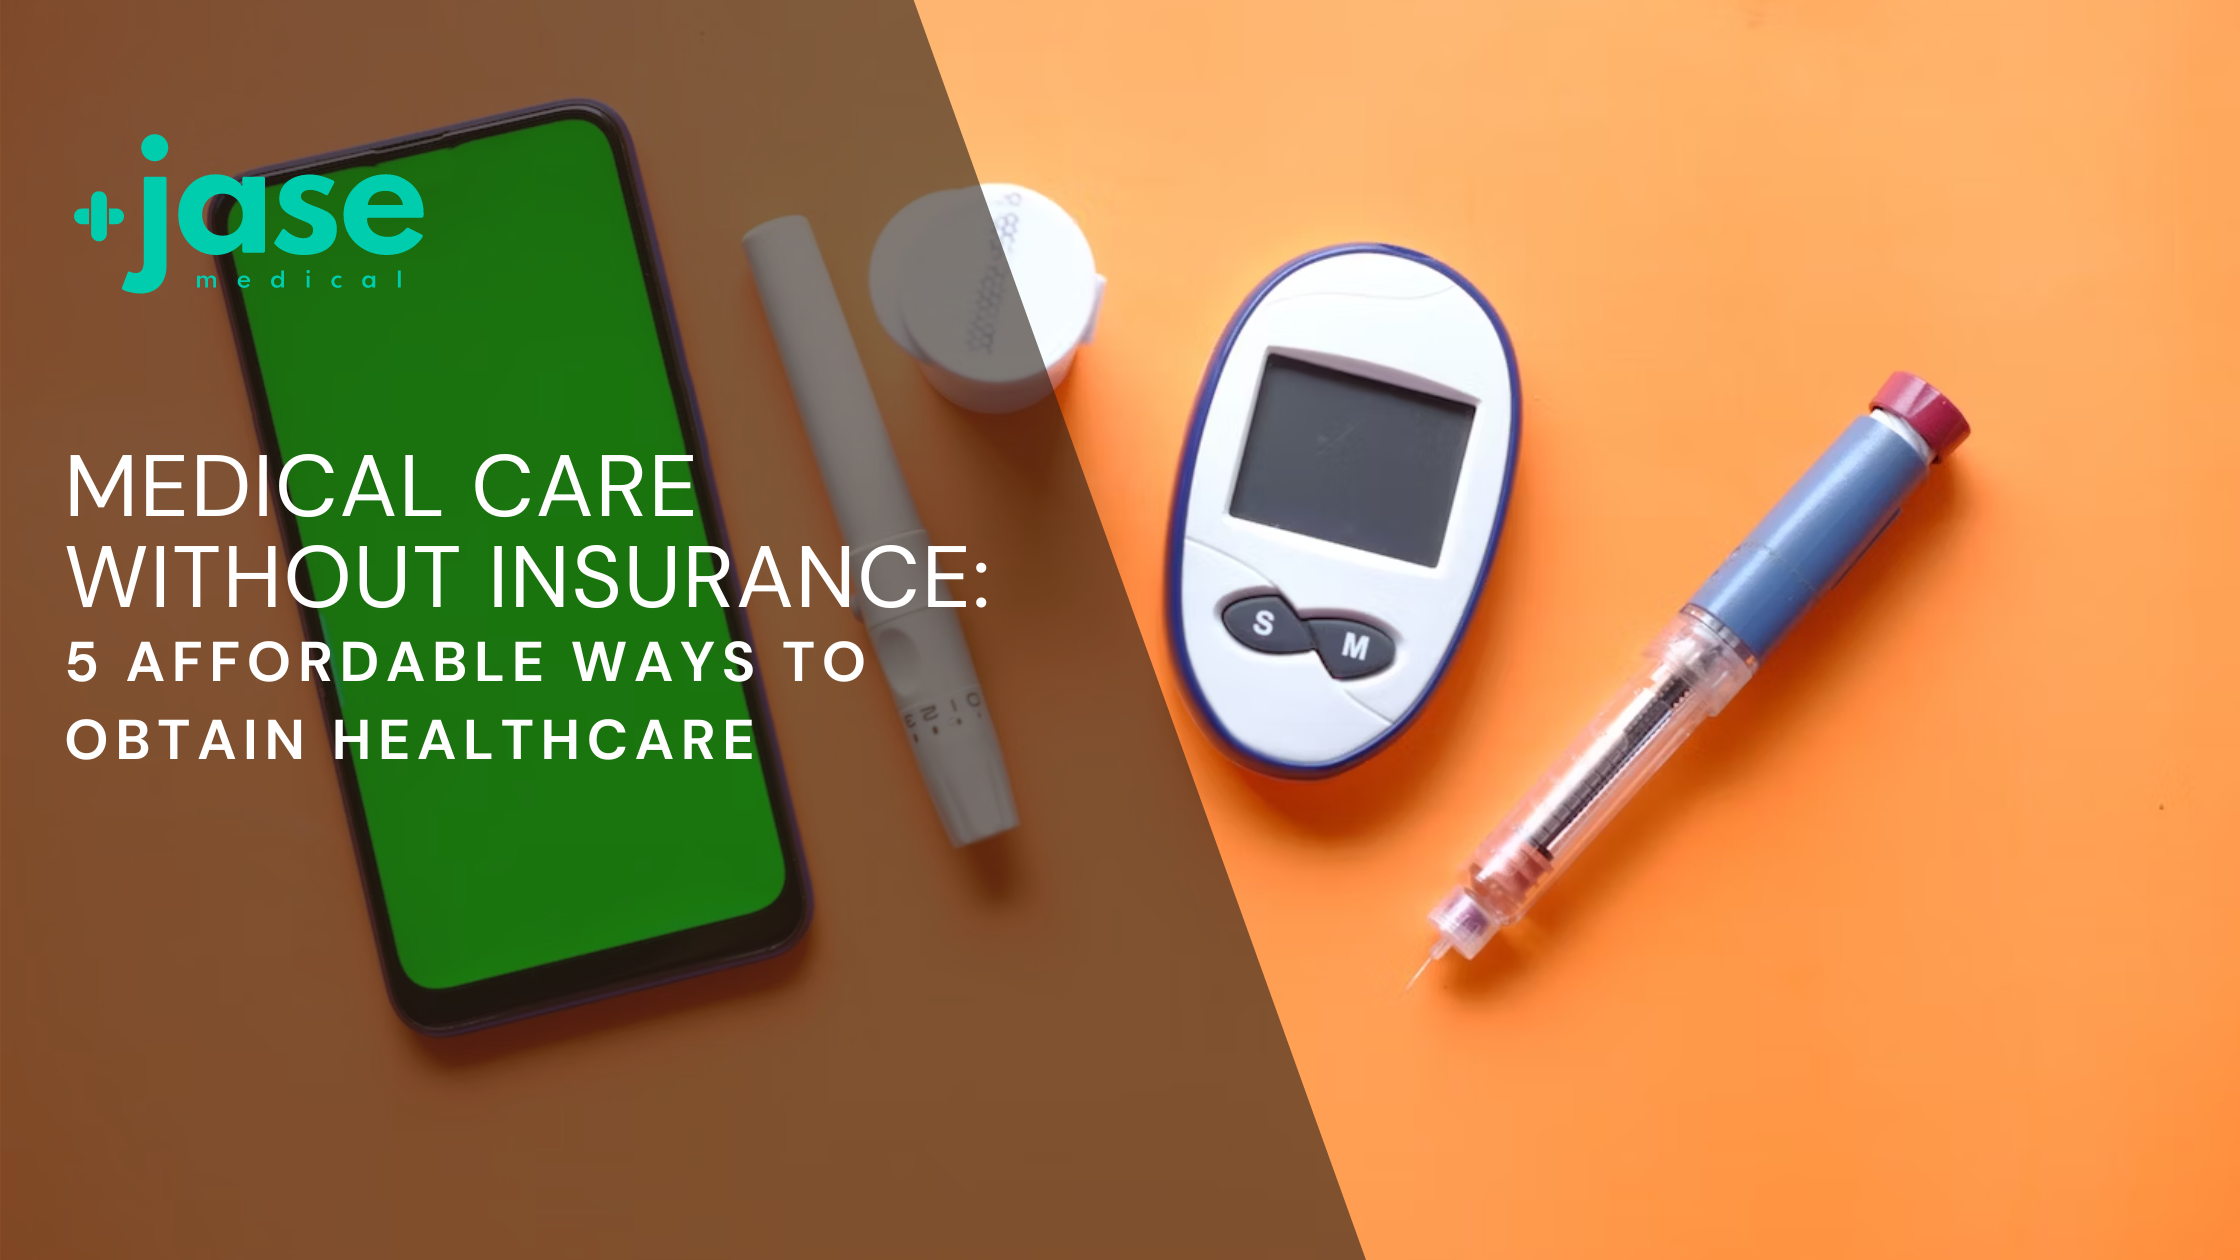 Medical Care Without Insurance: 5 Affordable Ways to Obtain Healthcare